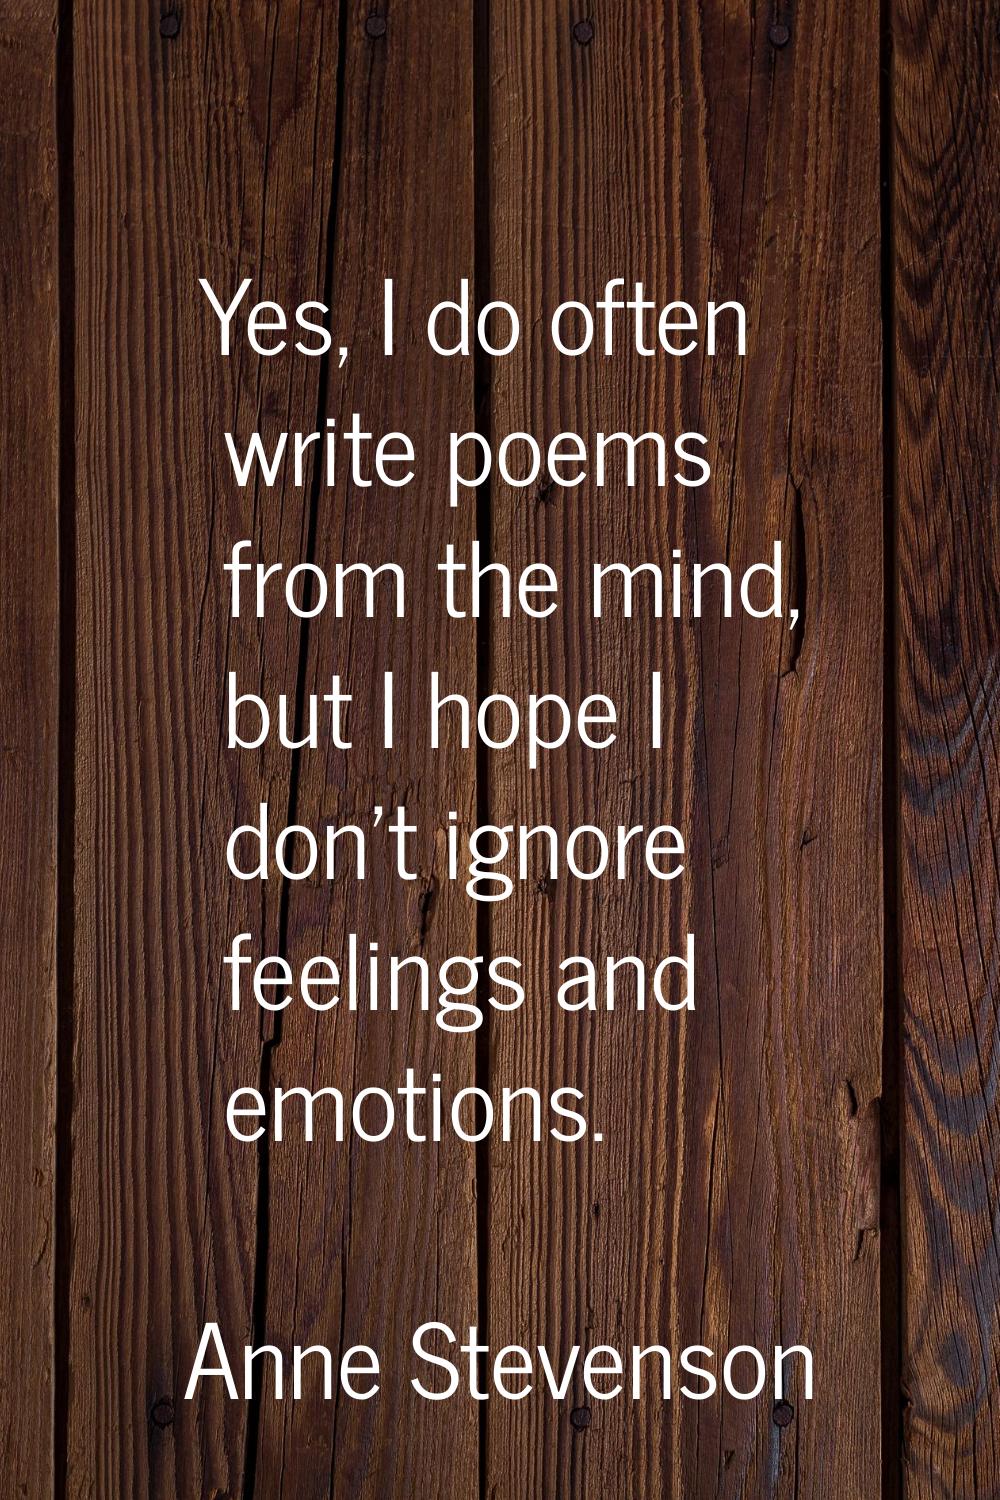 Yes, I do often write poems from the mind, but I hope I don't ignore feelings and emotions.